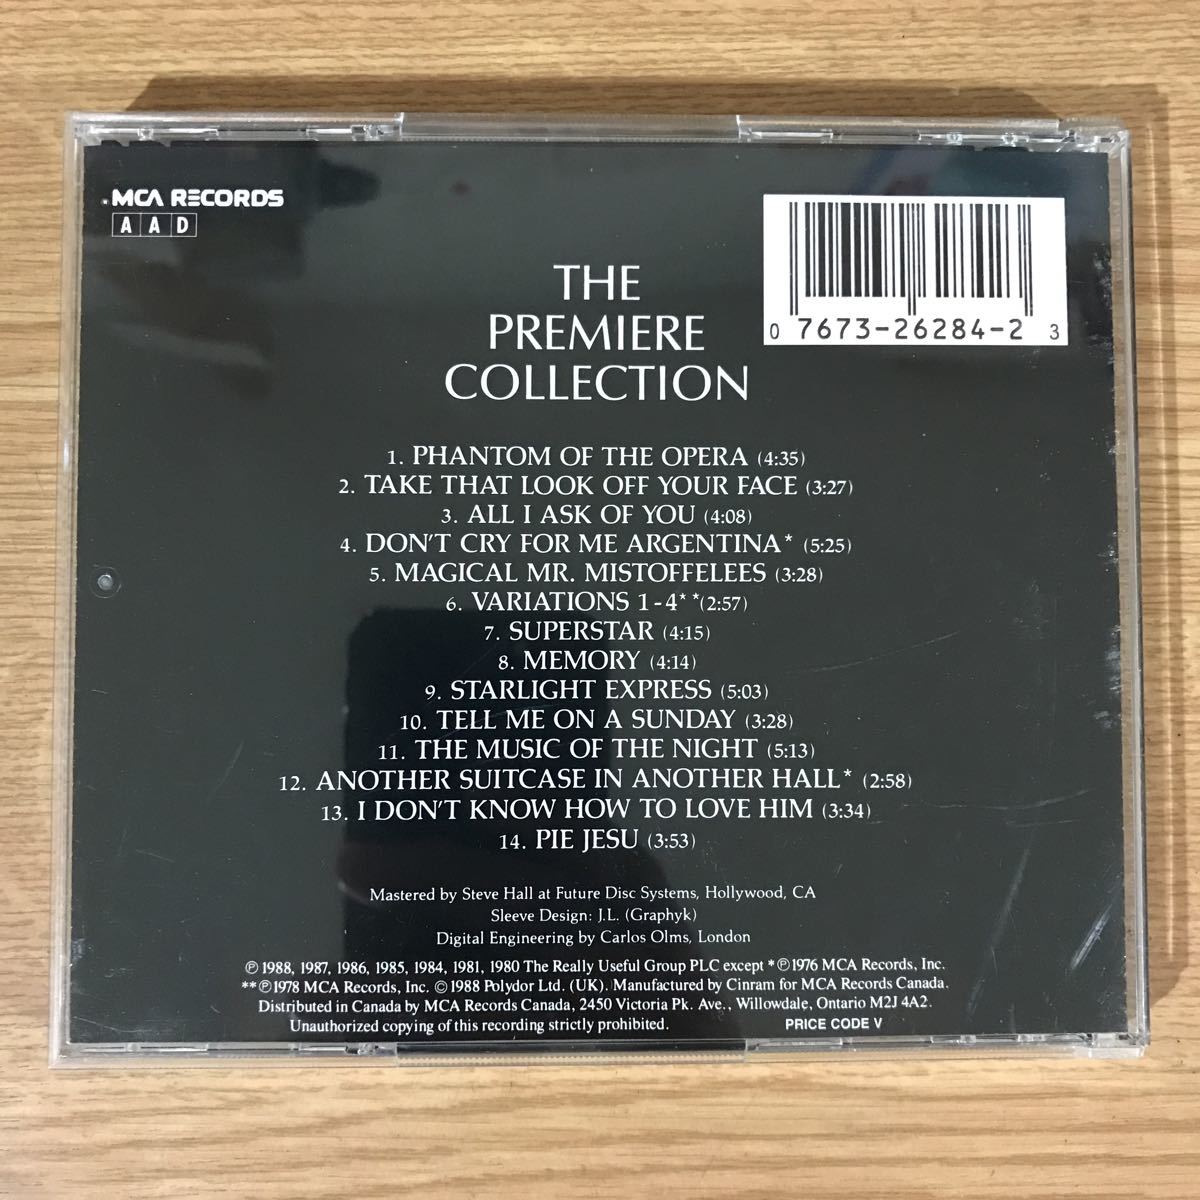 (B324)中古CD200円 The Premiere Collection: The Best Of Andrew Lloyd Webber (Original Cast Compilation)_画像2